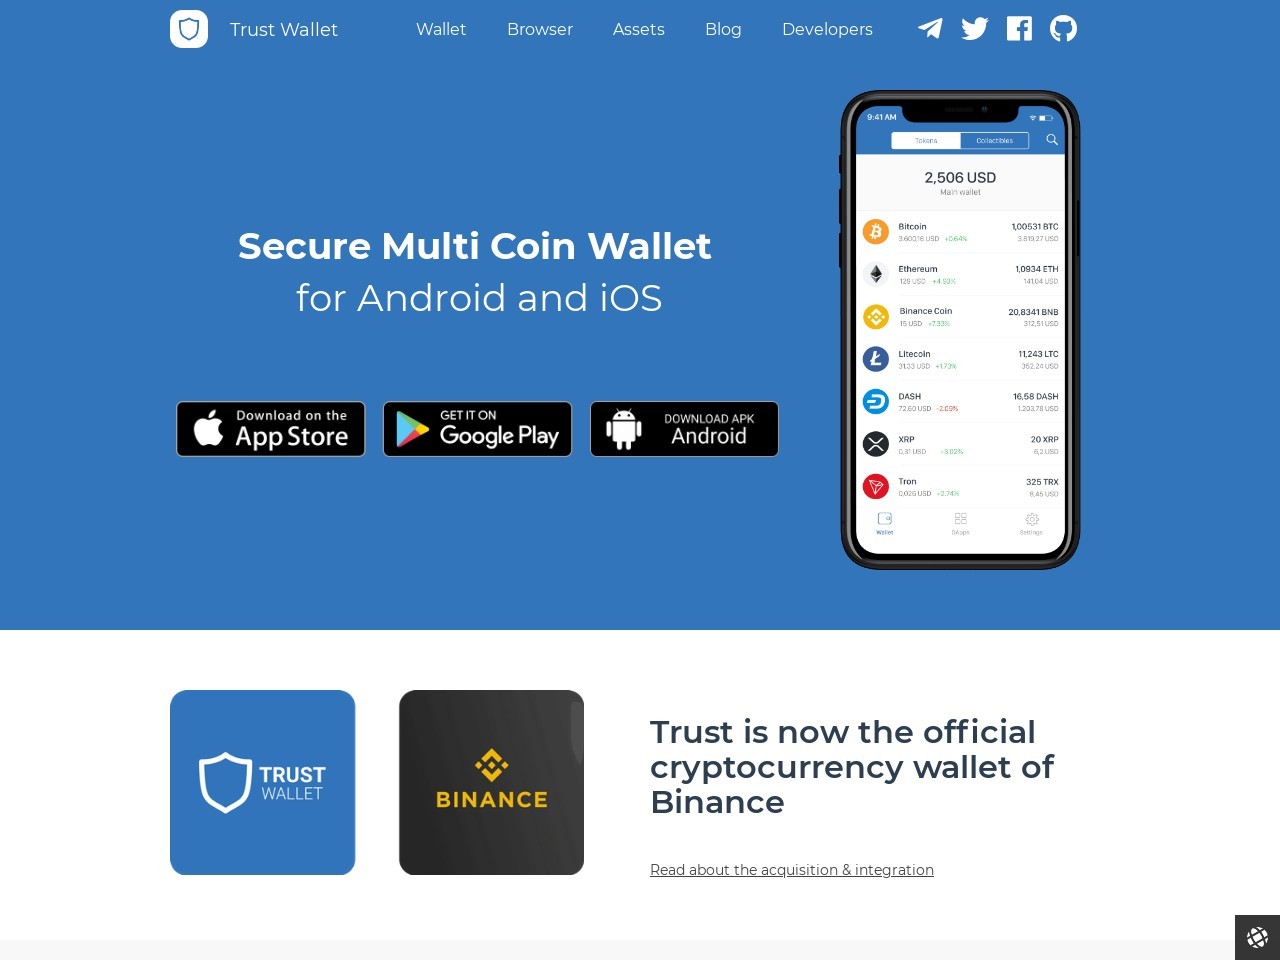 Best ios multi crypto wallet do capital or lower case letters matter for crypto addresses